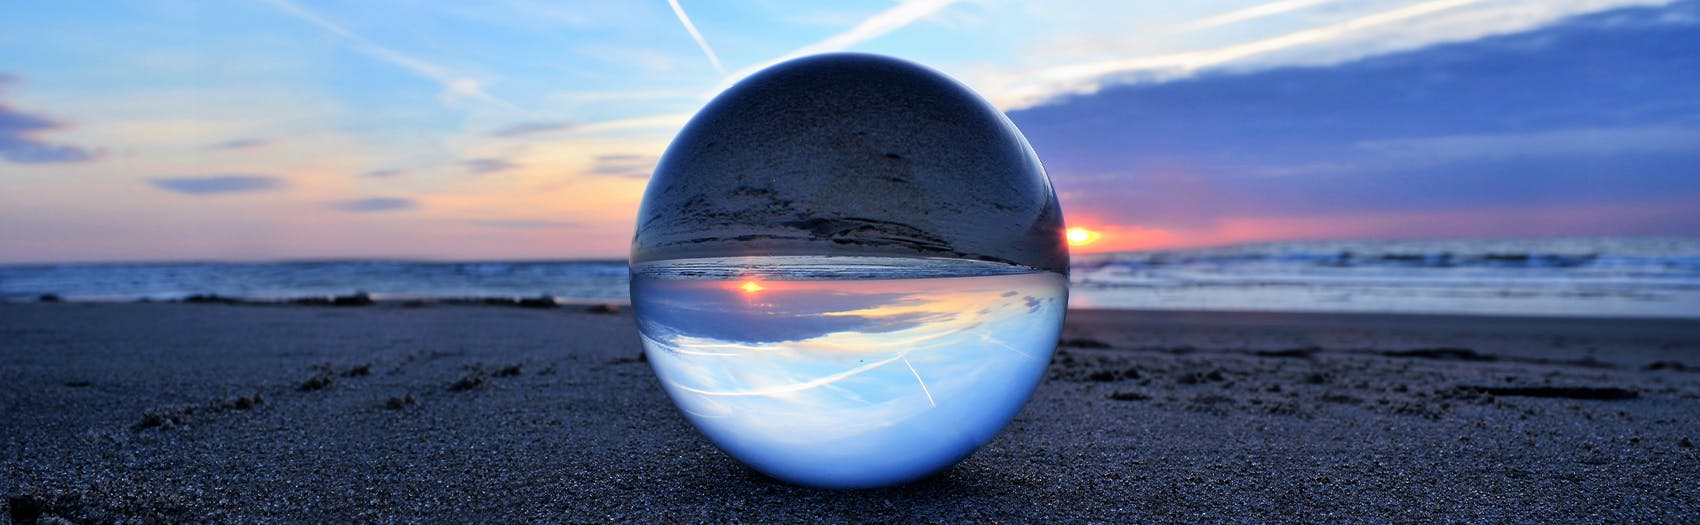 A mirrored sphere on a beach with waves in the background